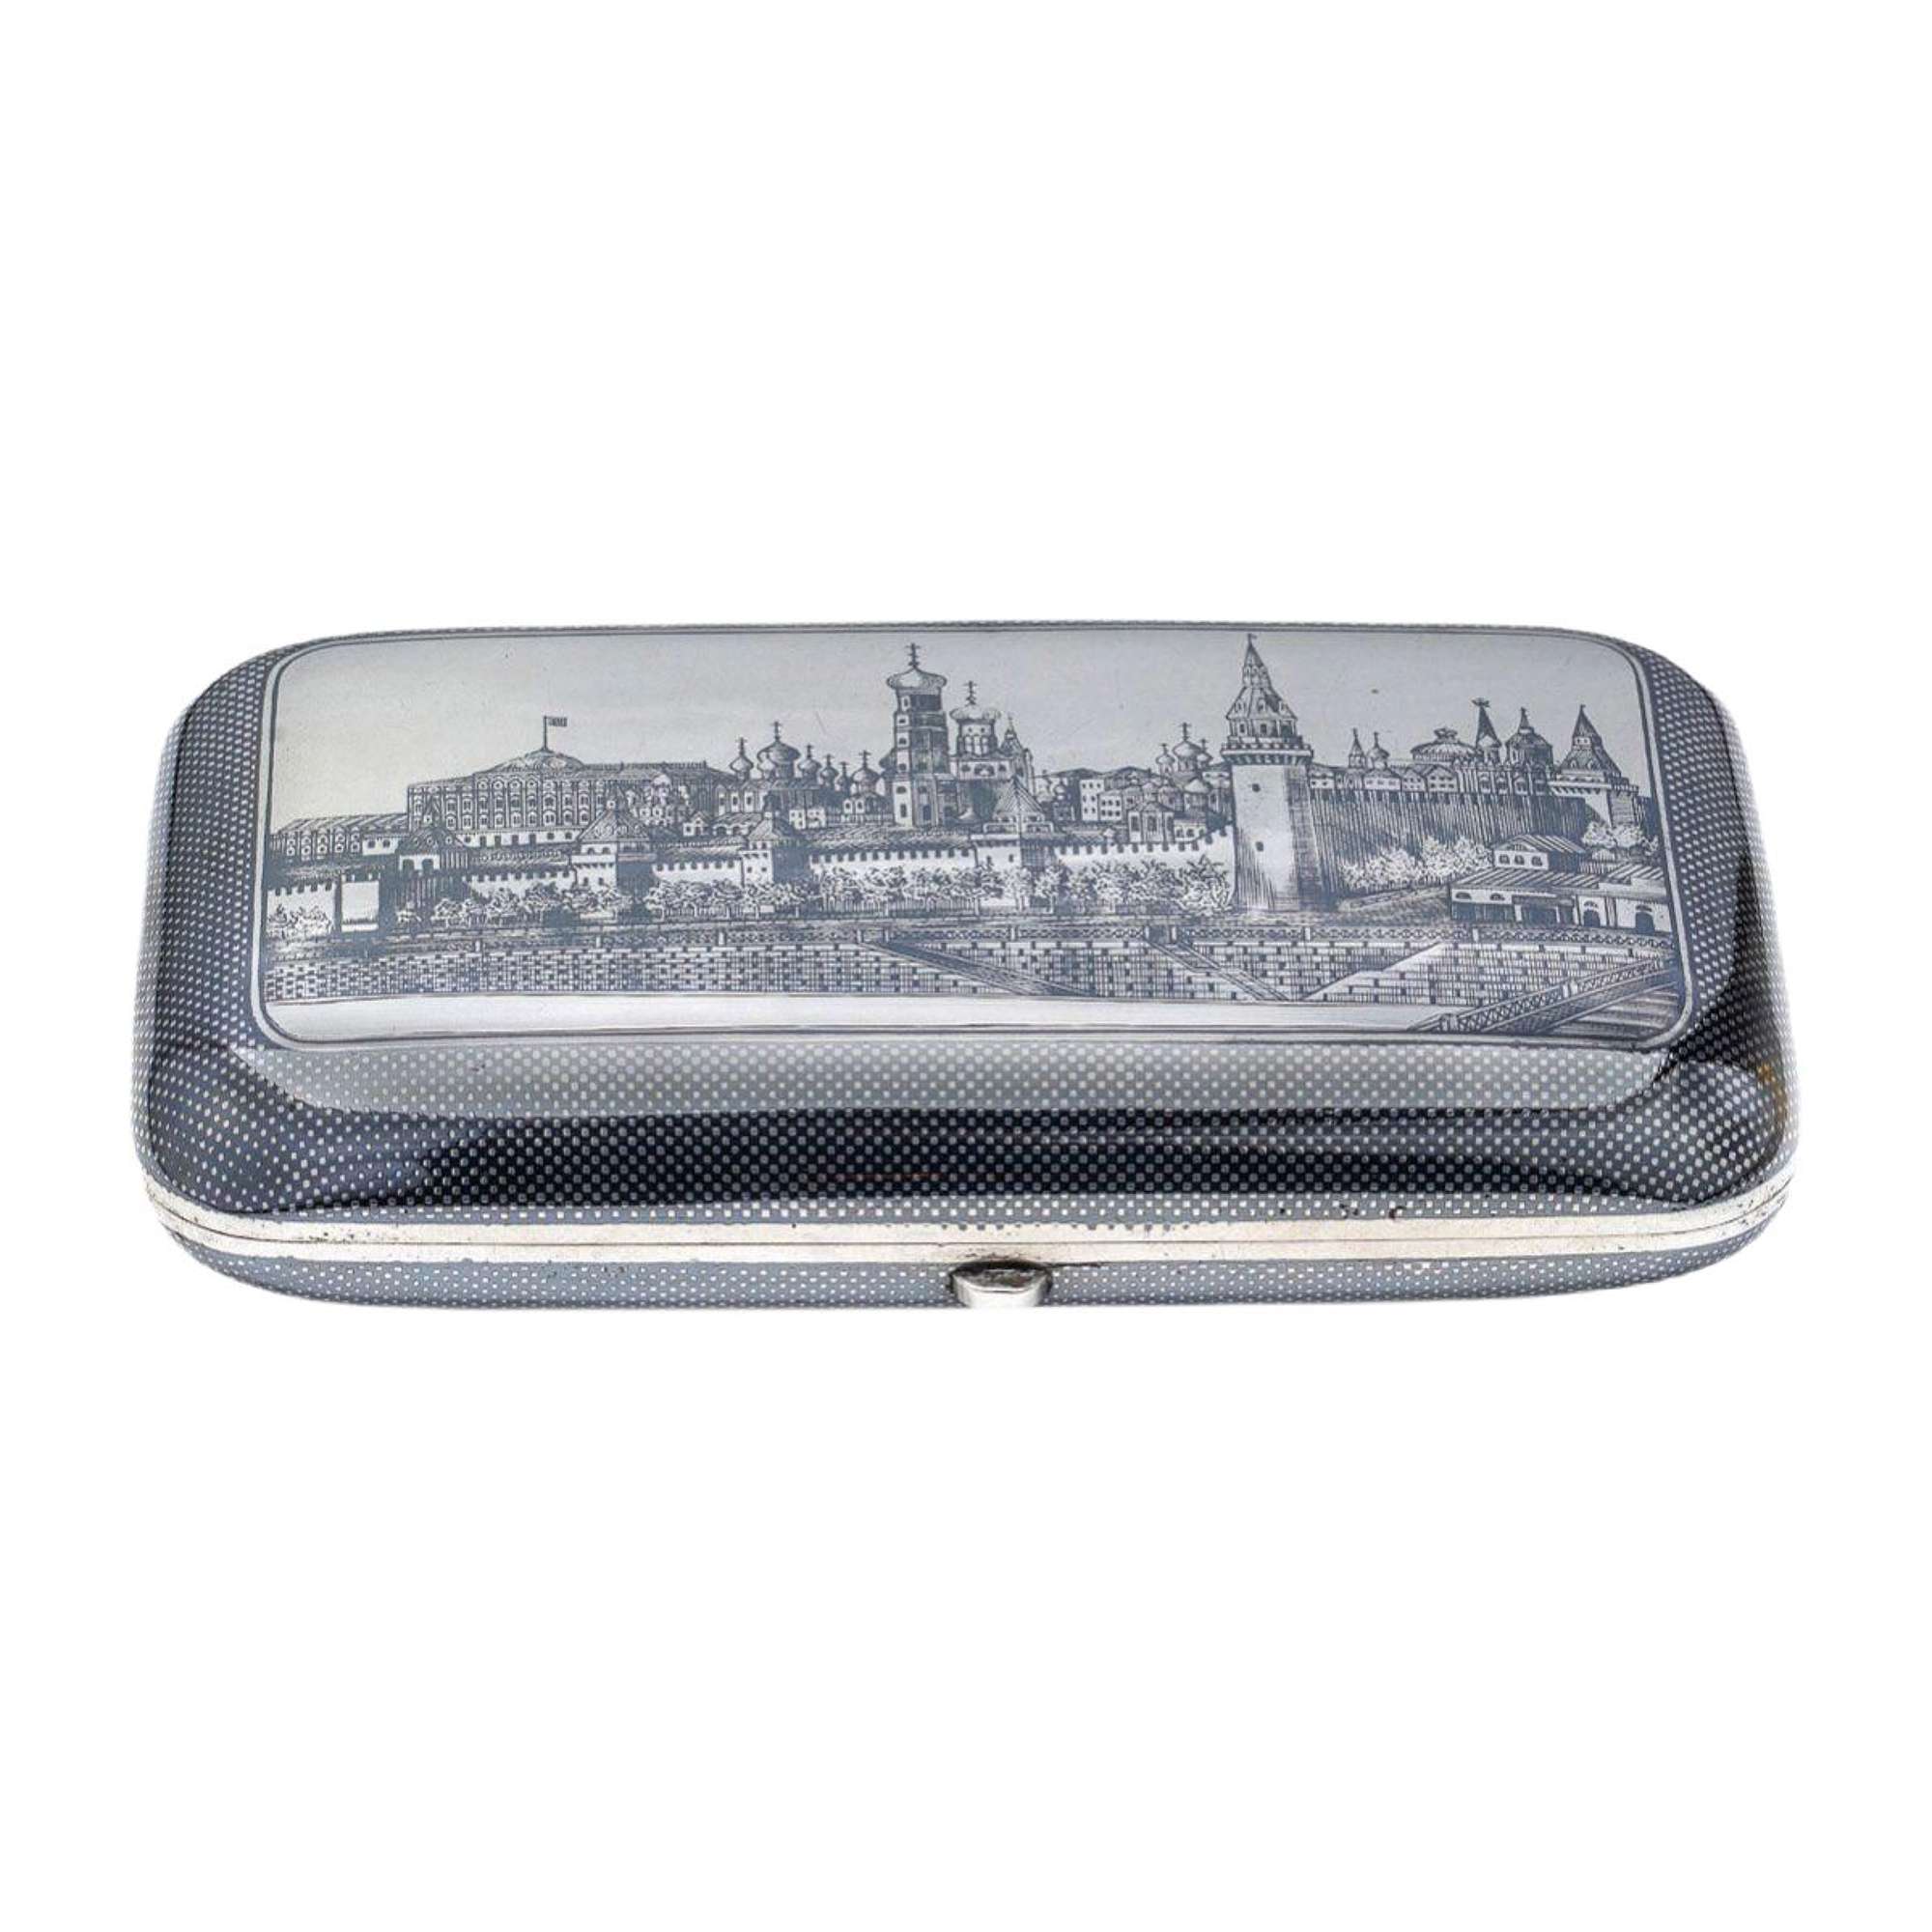 19th Century Russian Silver Cigarette Case with Blackened Kremlin Panorama